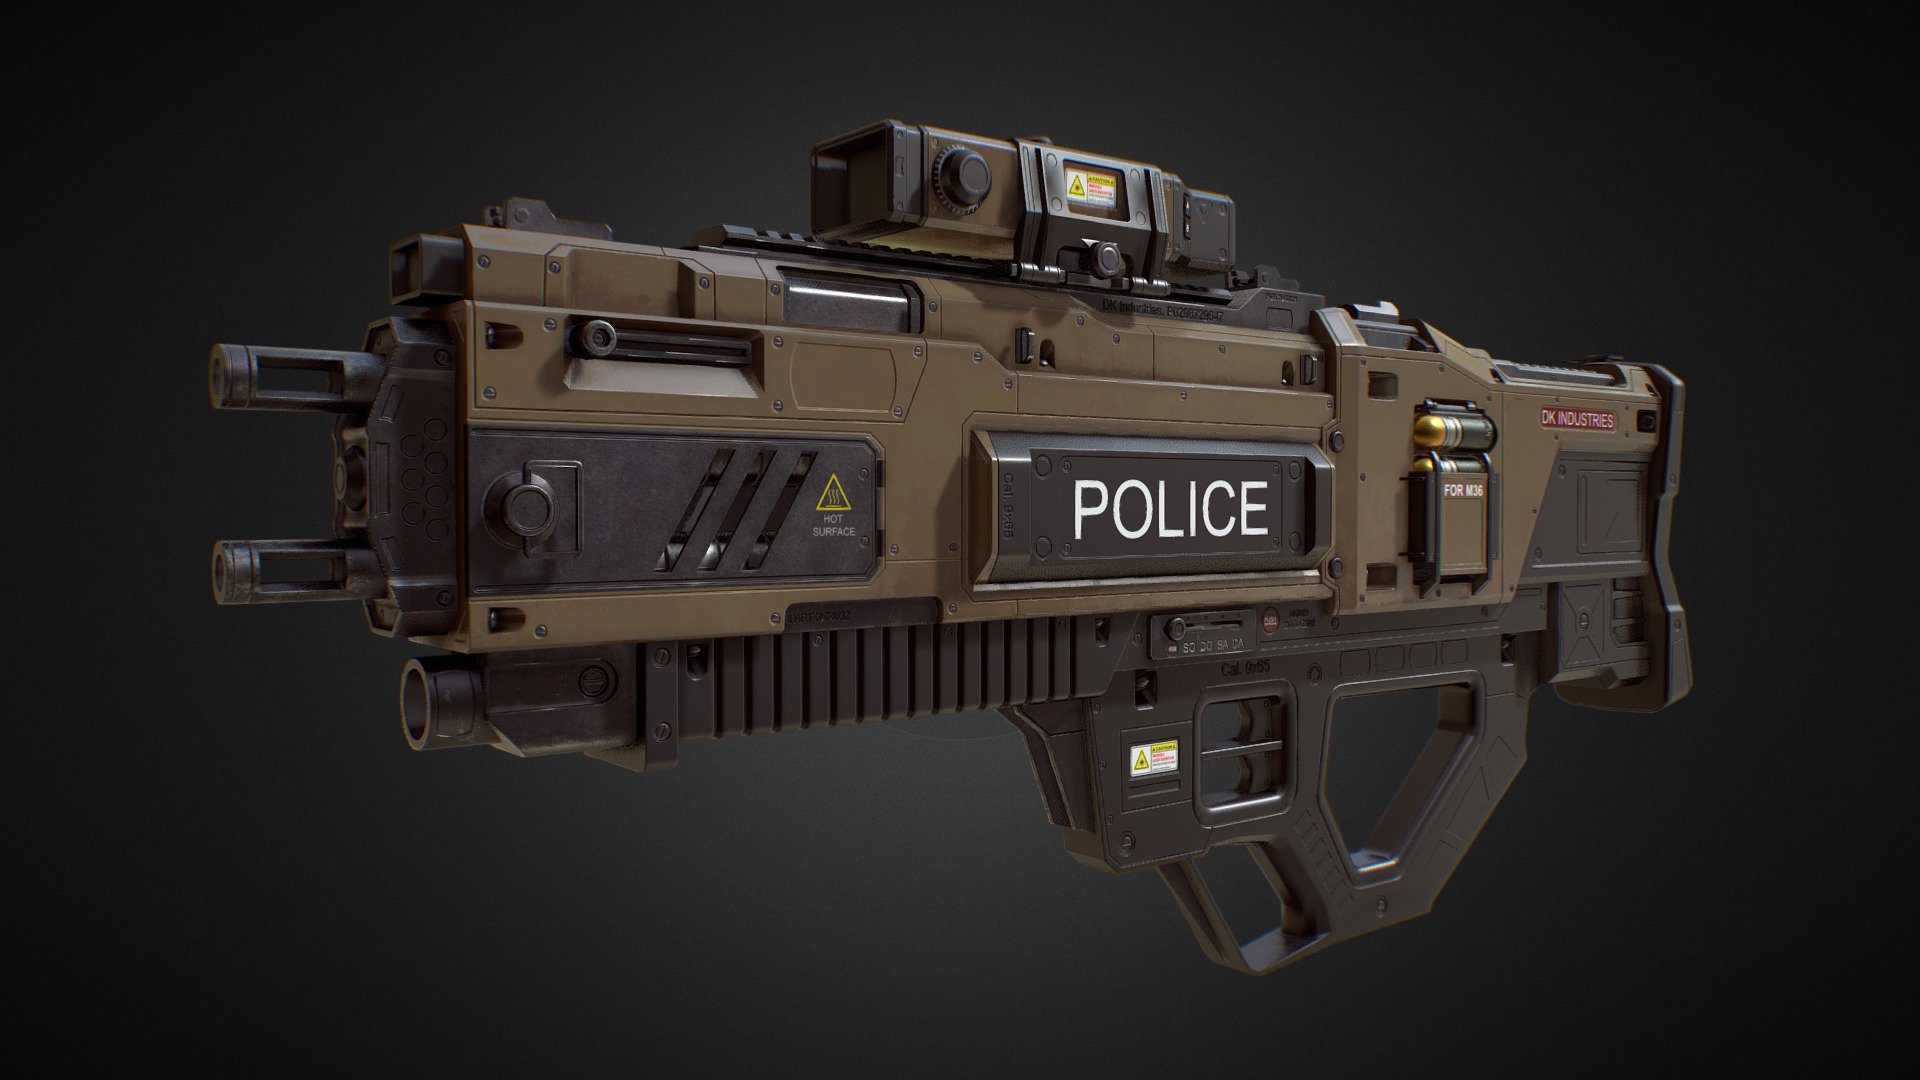 PBR Modular Assault Rifle from Sci-Fi weapon pack on unity assetstore (PBR SciFi Weapons v1)  with movable parts and hires textures - PBR Assault Rifle (from Sci-Fi weapon pack) - 3D model by Dmitrii_Kutsenko (@Dmitrii_Kutcenko) 3d model